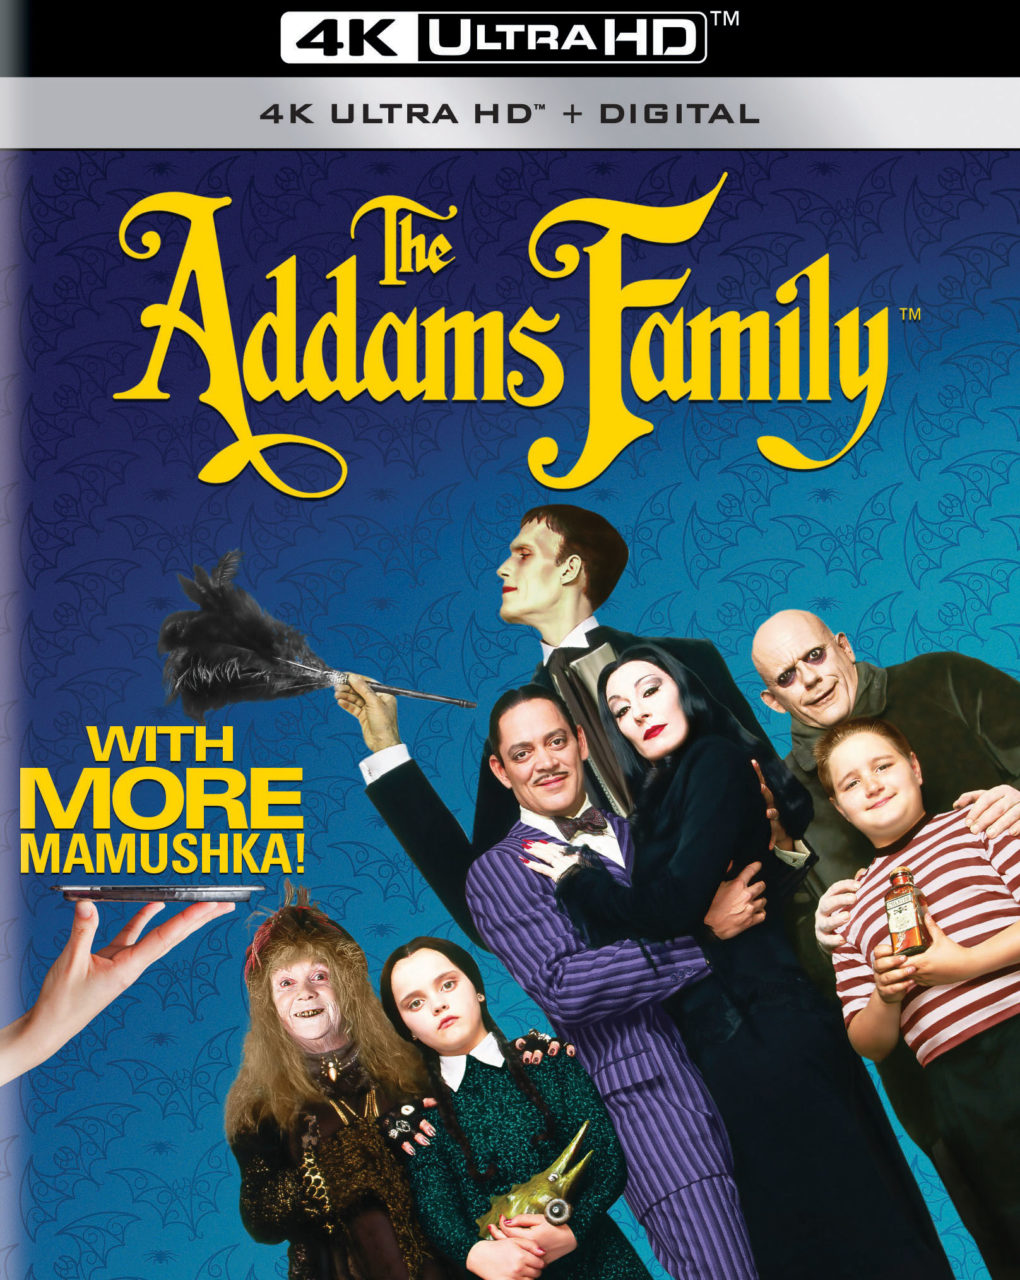 The Addams Family 4K Ultra HD Combo Pack cover (Paramount Home Entertainment)